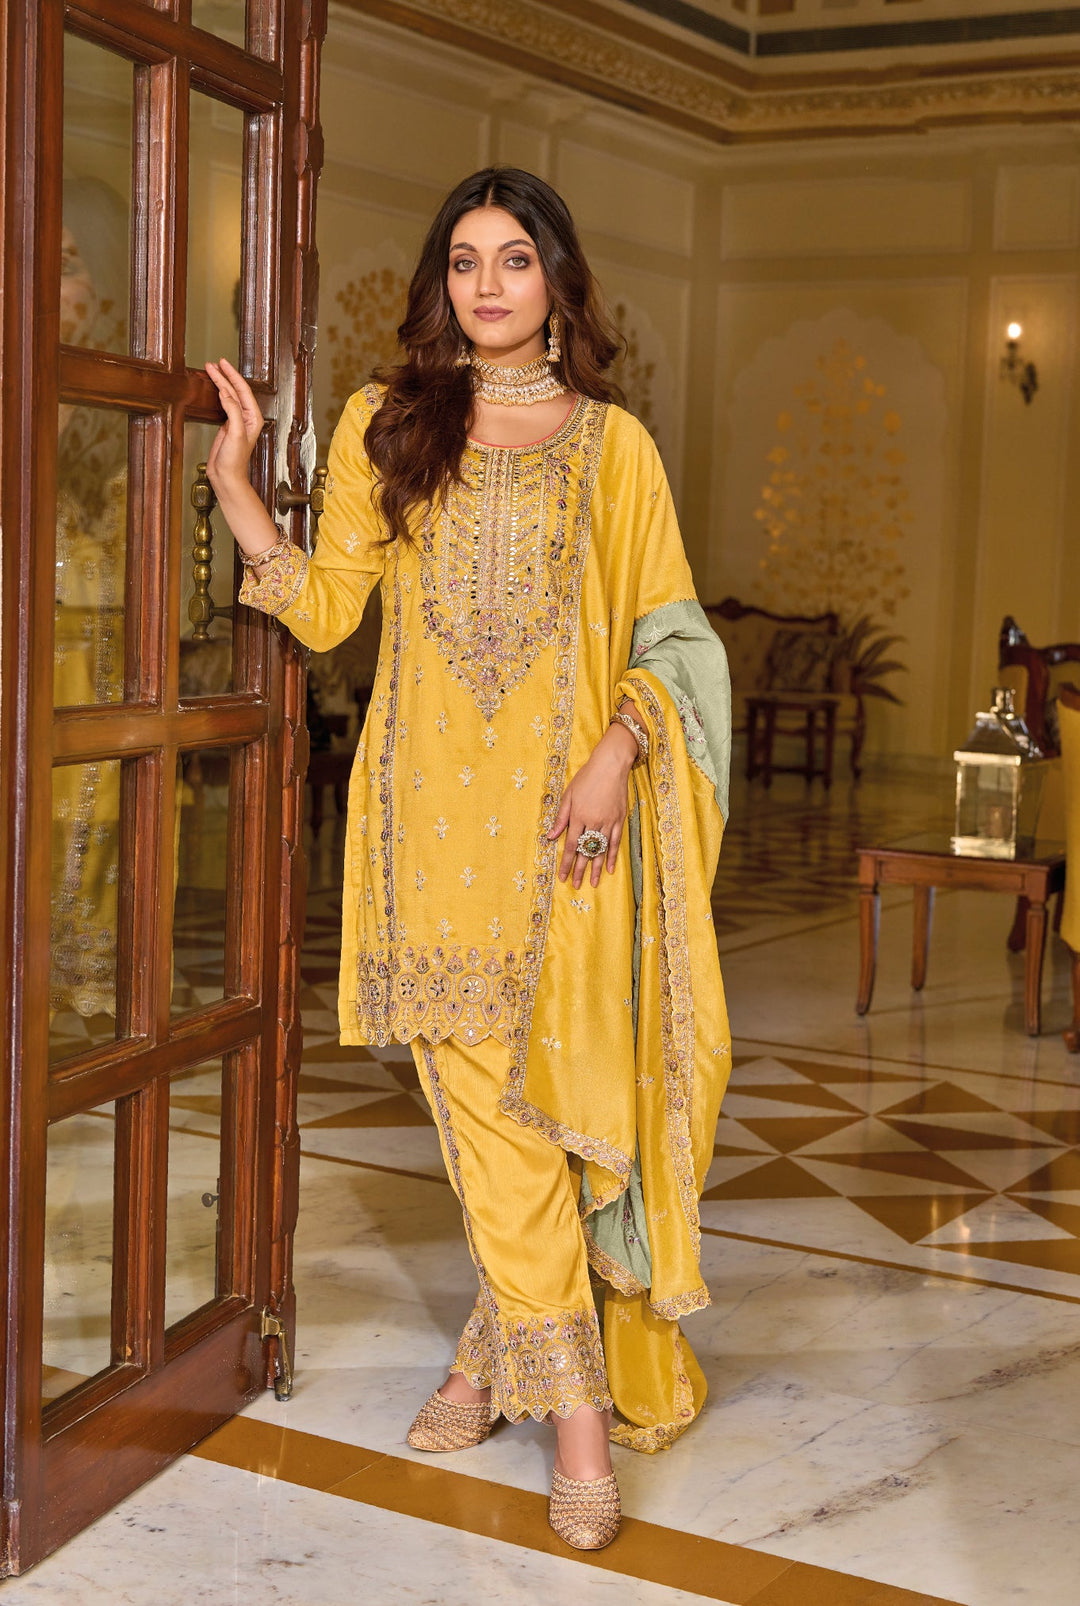 Elegant Yellow Silk Salwar Suit with Exquisite Embroidery for Wedding & Parties